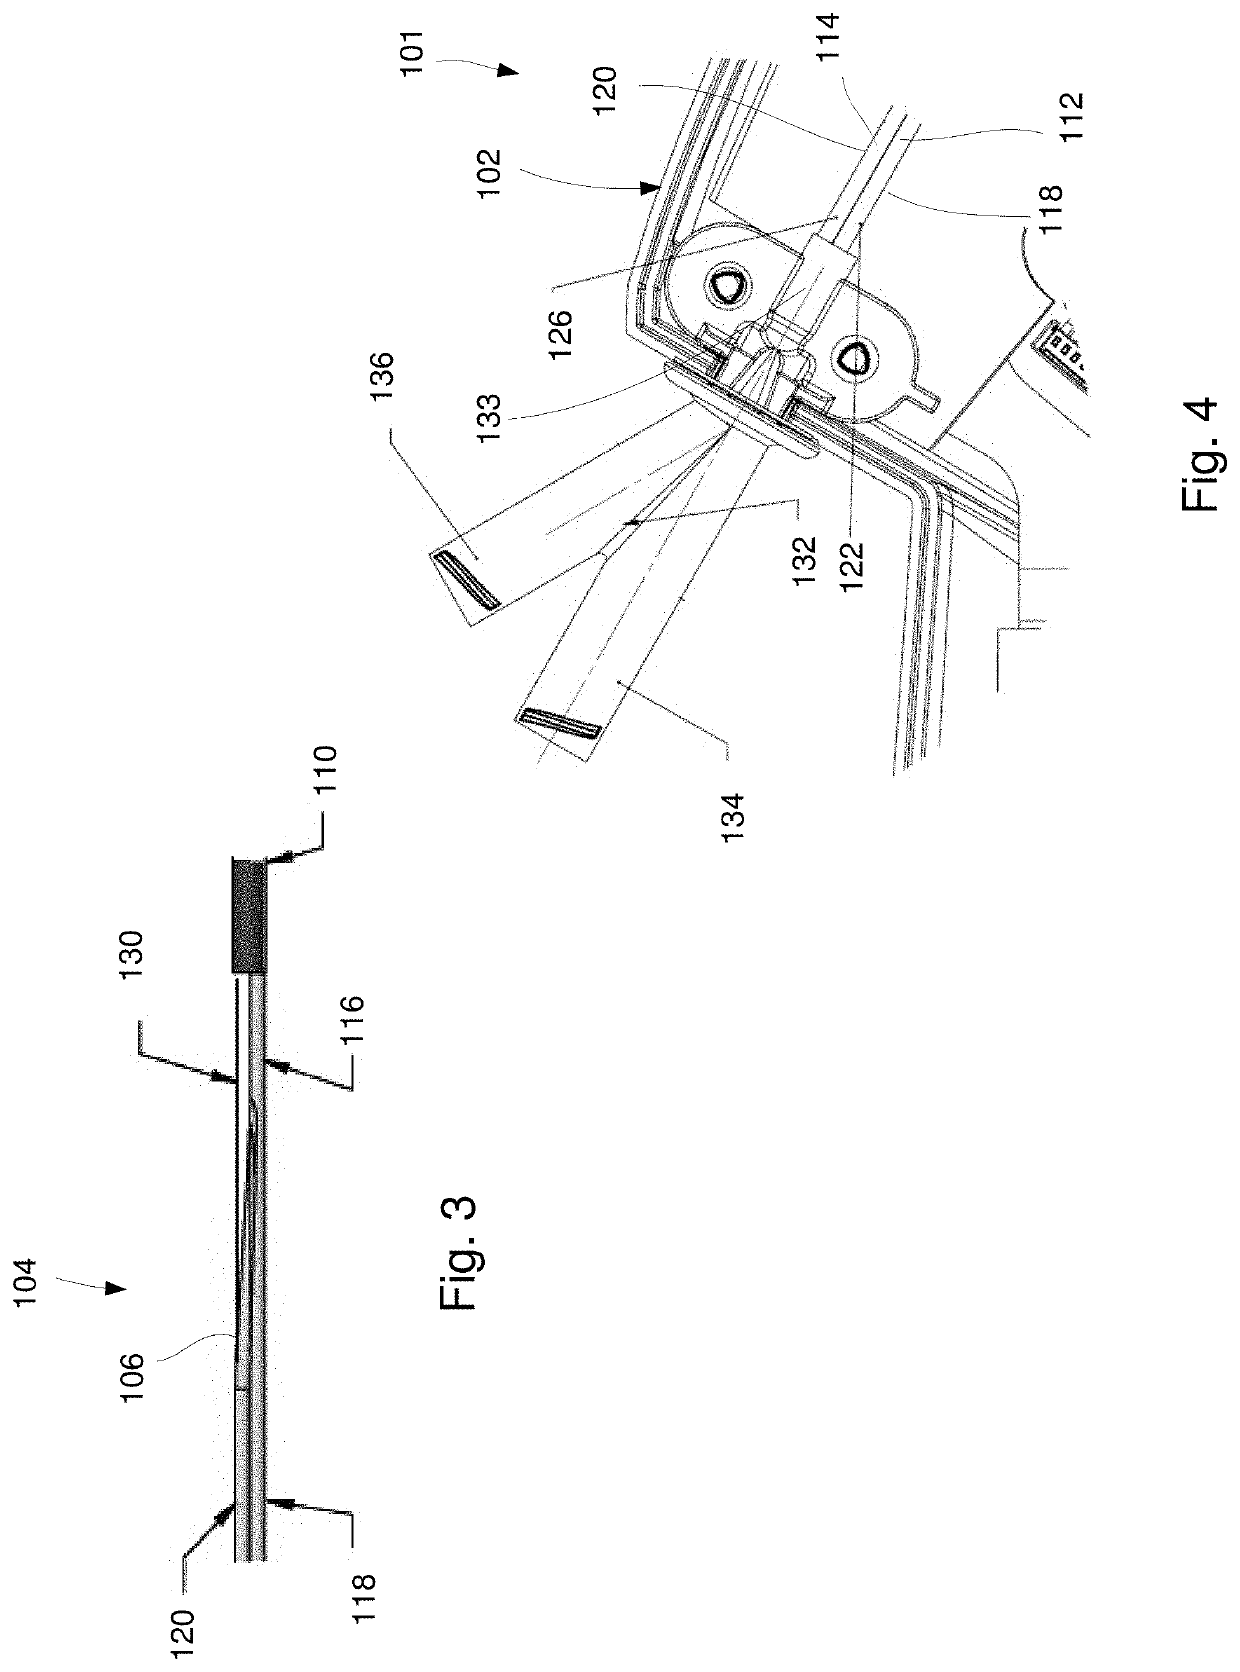 Flexible ureteroscope with quick medical device access and exchange